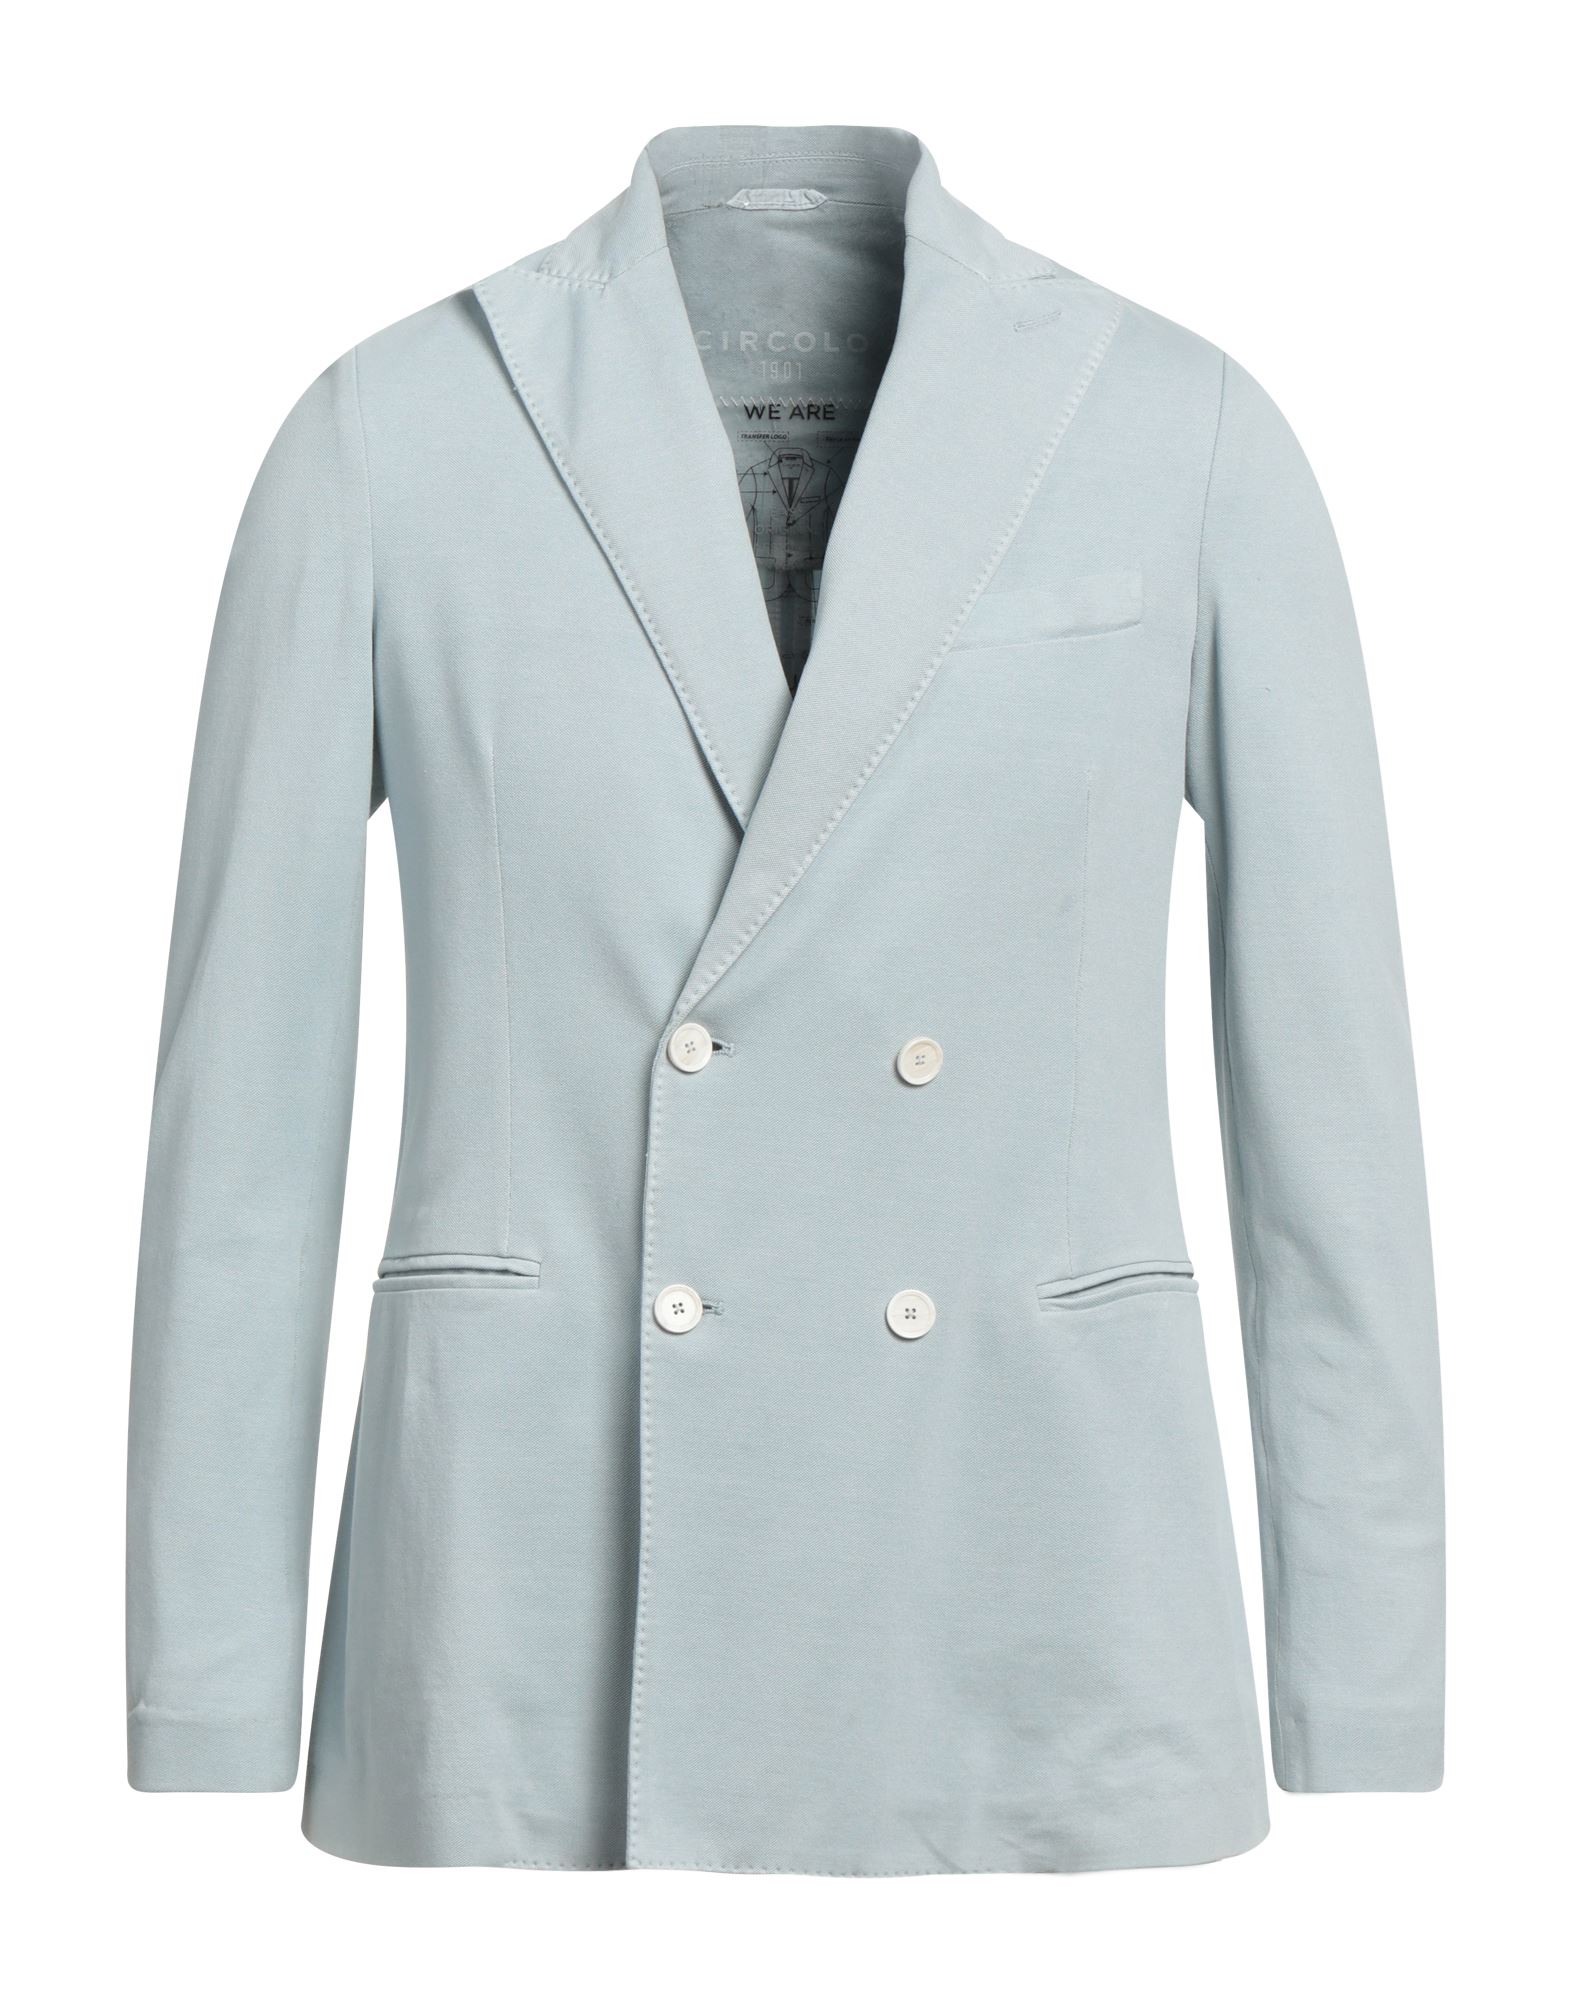 Circolo 1901 Suit Jackets In Blue